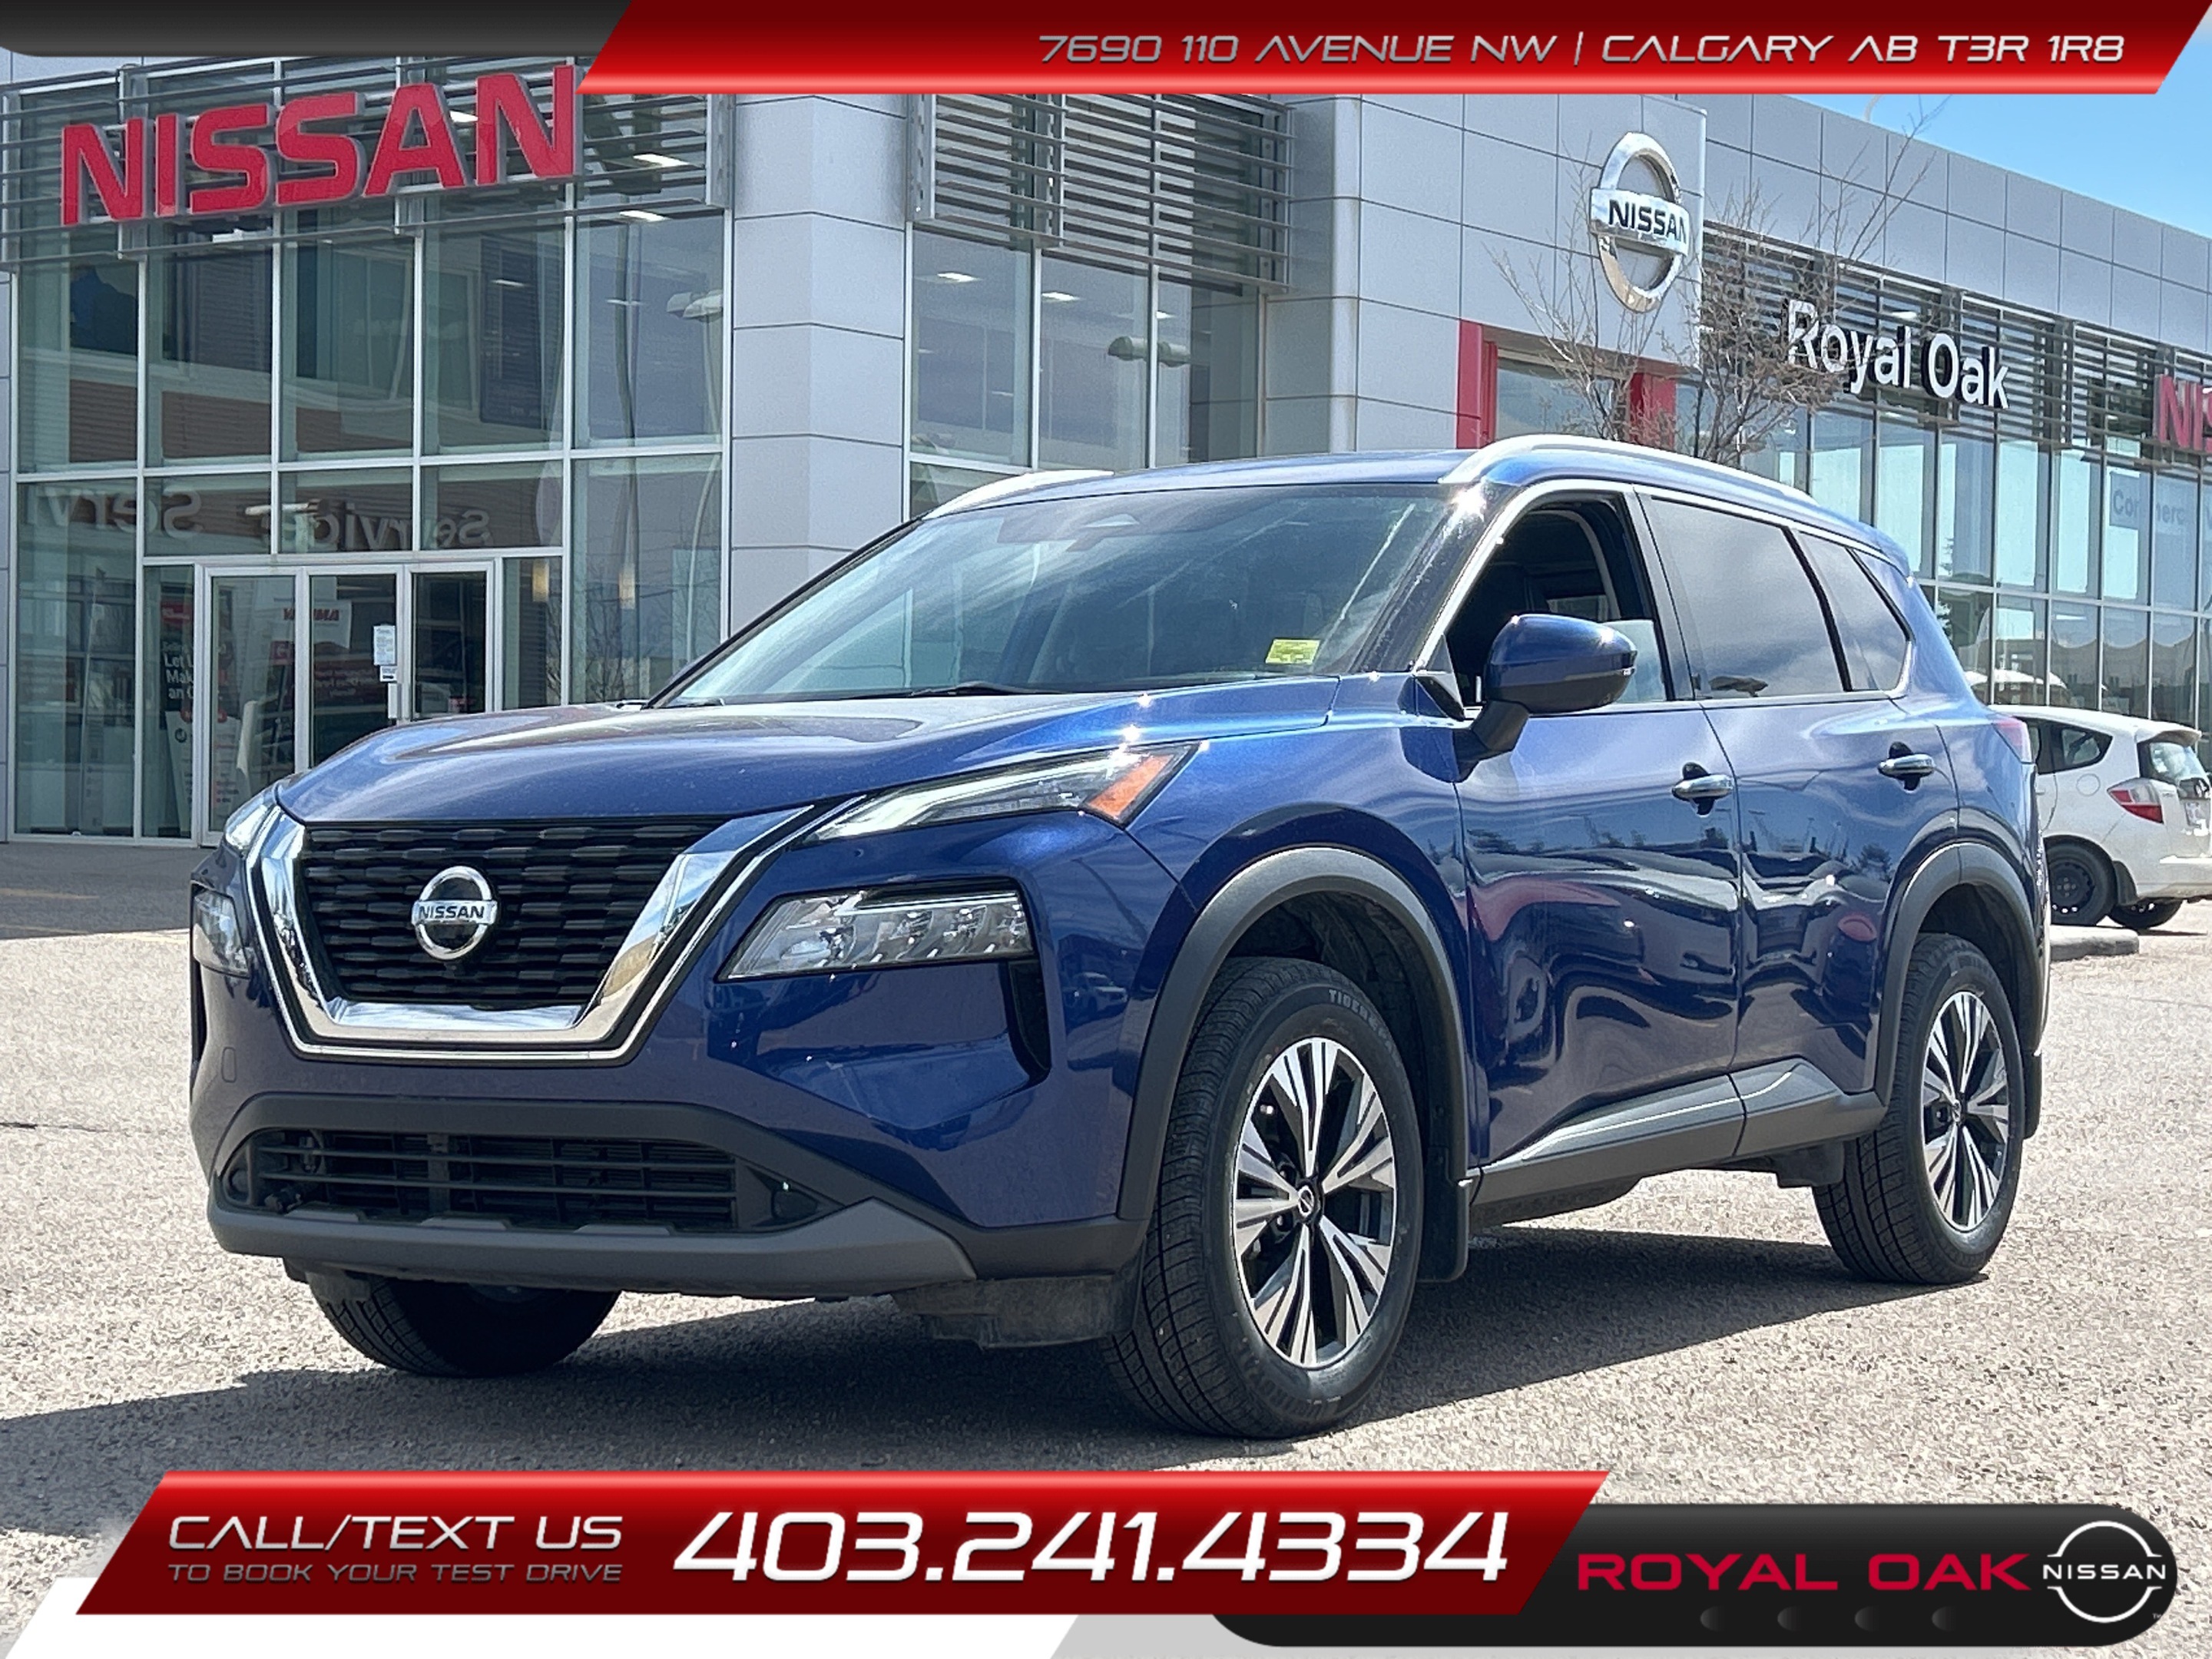 2021 Nissan Rogue SV AWD - Certified Pre-Owned Vehicle (CPO)